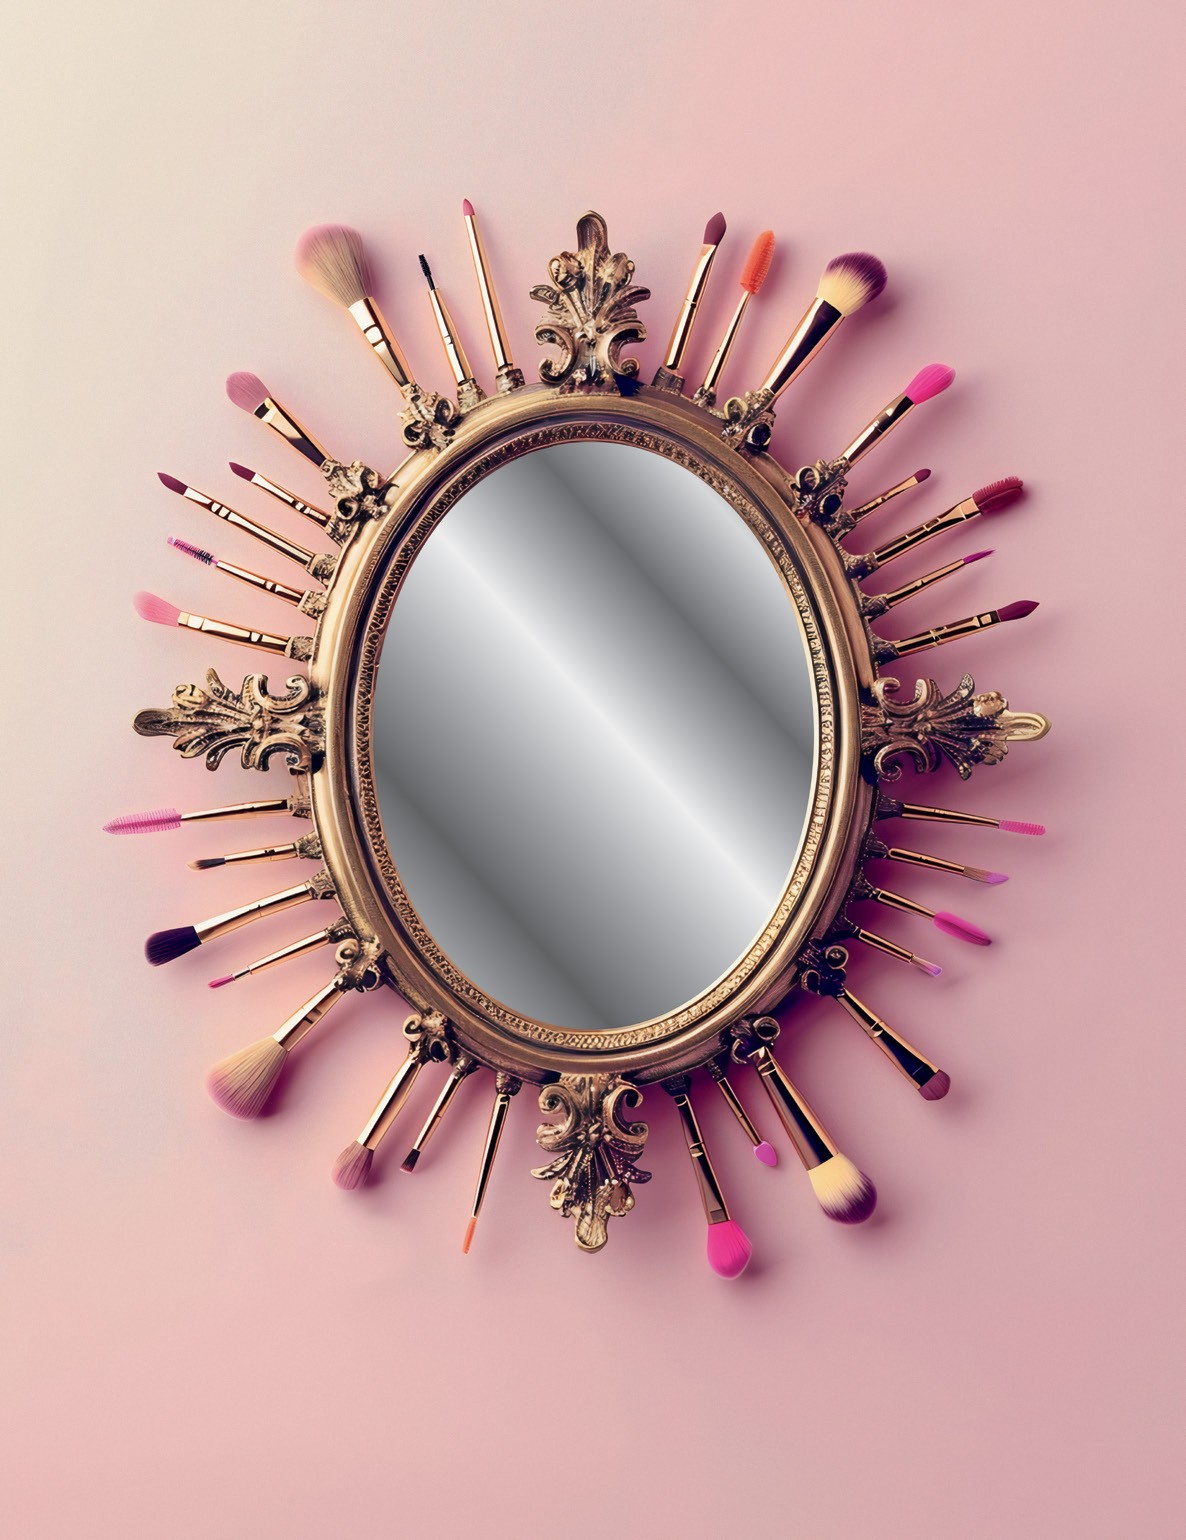 Mirror with makeup brushes around the frame